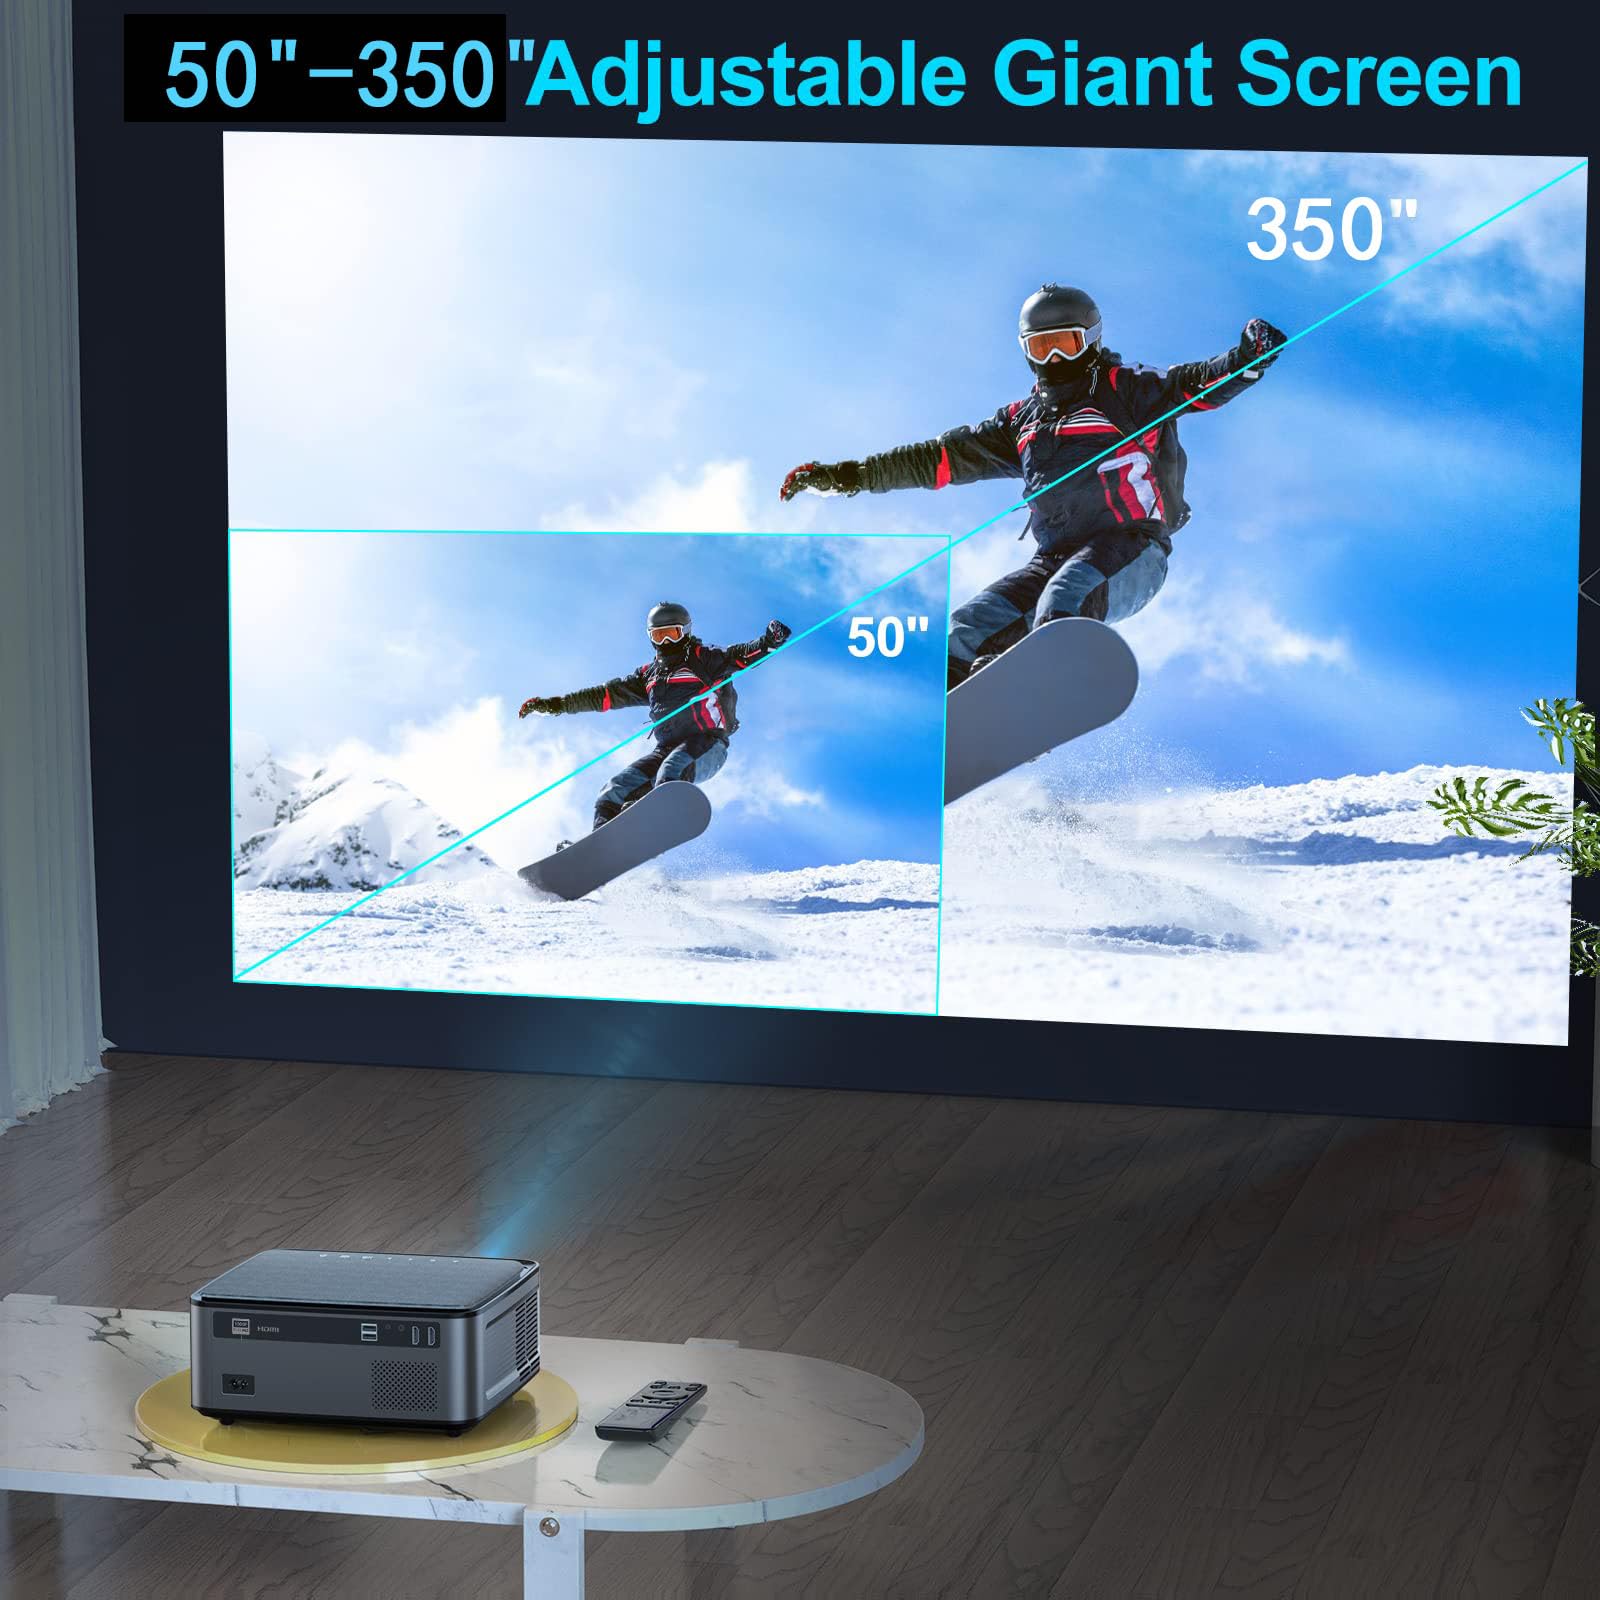 5G WiFi Bluetooth Projector, YABER Native 1080P Outdoor Movie Projector with 350